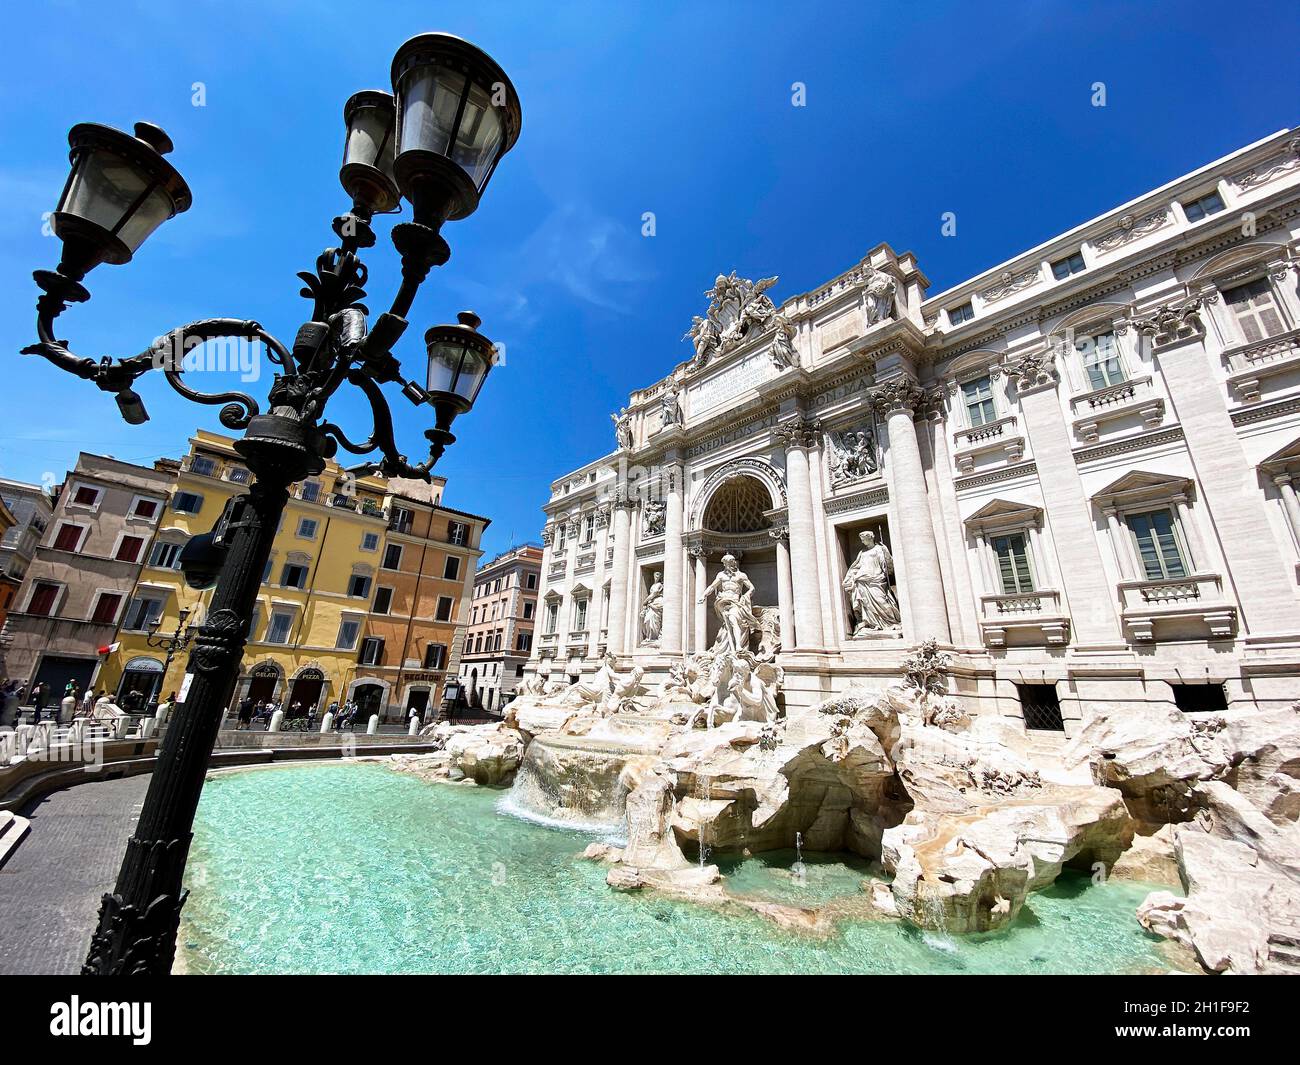 Rome, Italy, May 25th 2020: The Trevi Fountain in Rome with the first tourists after the lockdown due to the coronavirus pandemic. Access to the fount Stock Photo